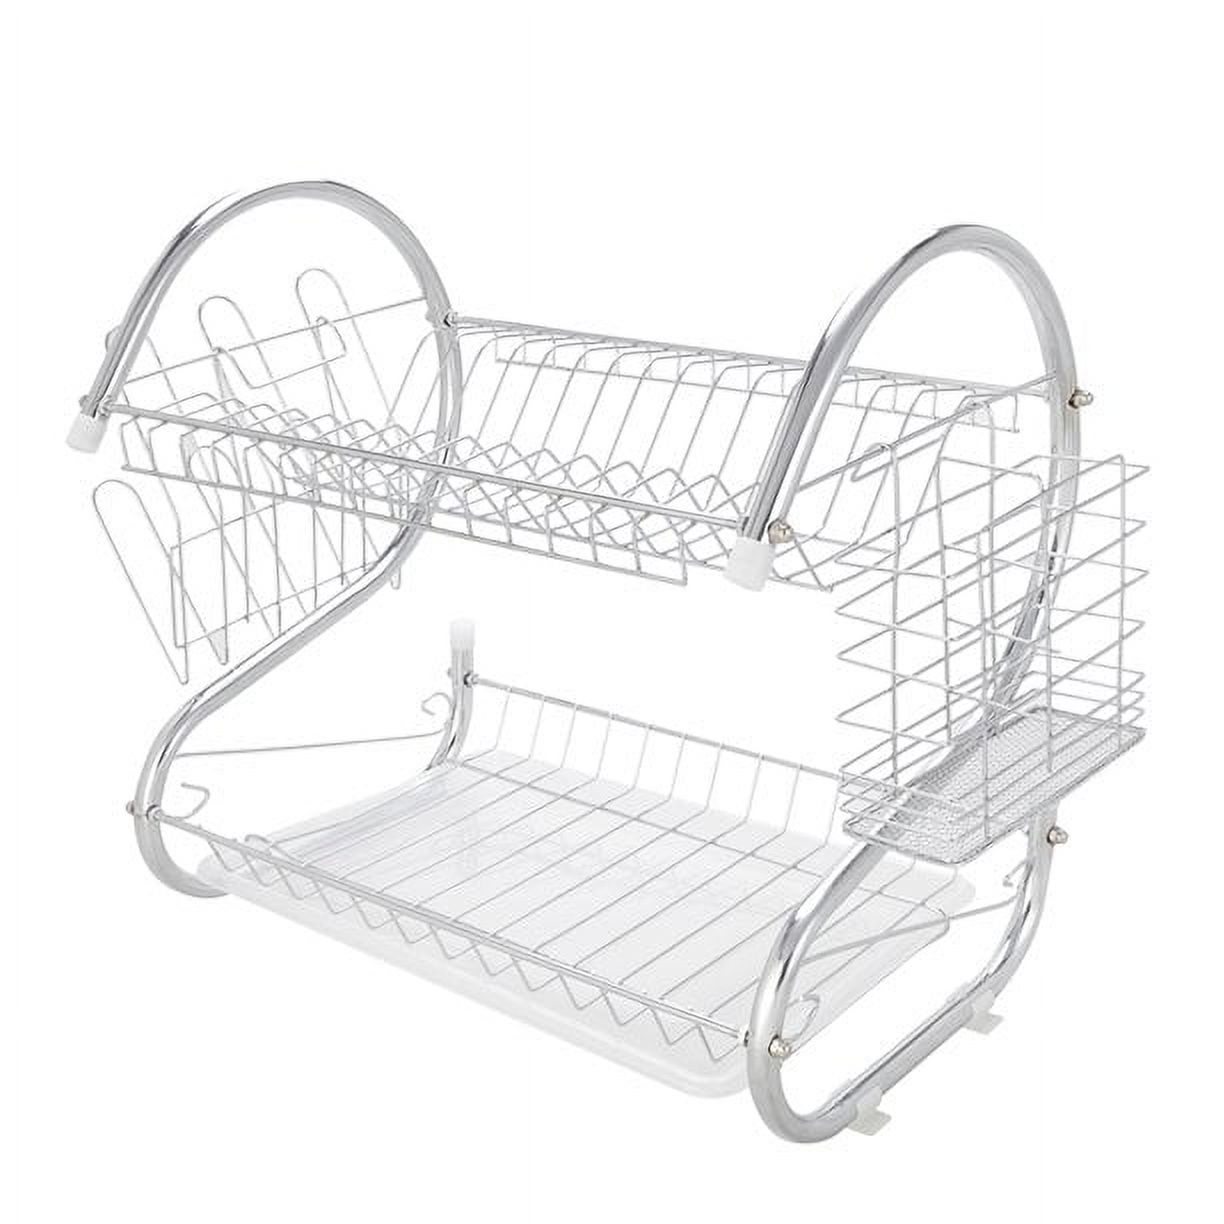 Good world Hot Sale 2-Tier Stainless Steel Silver Dish Rack with Drainboard - image 2 of 7